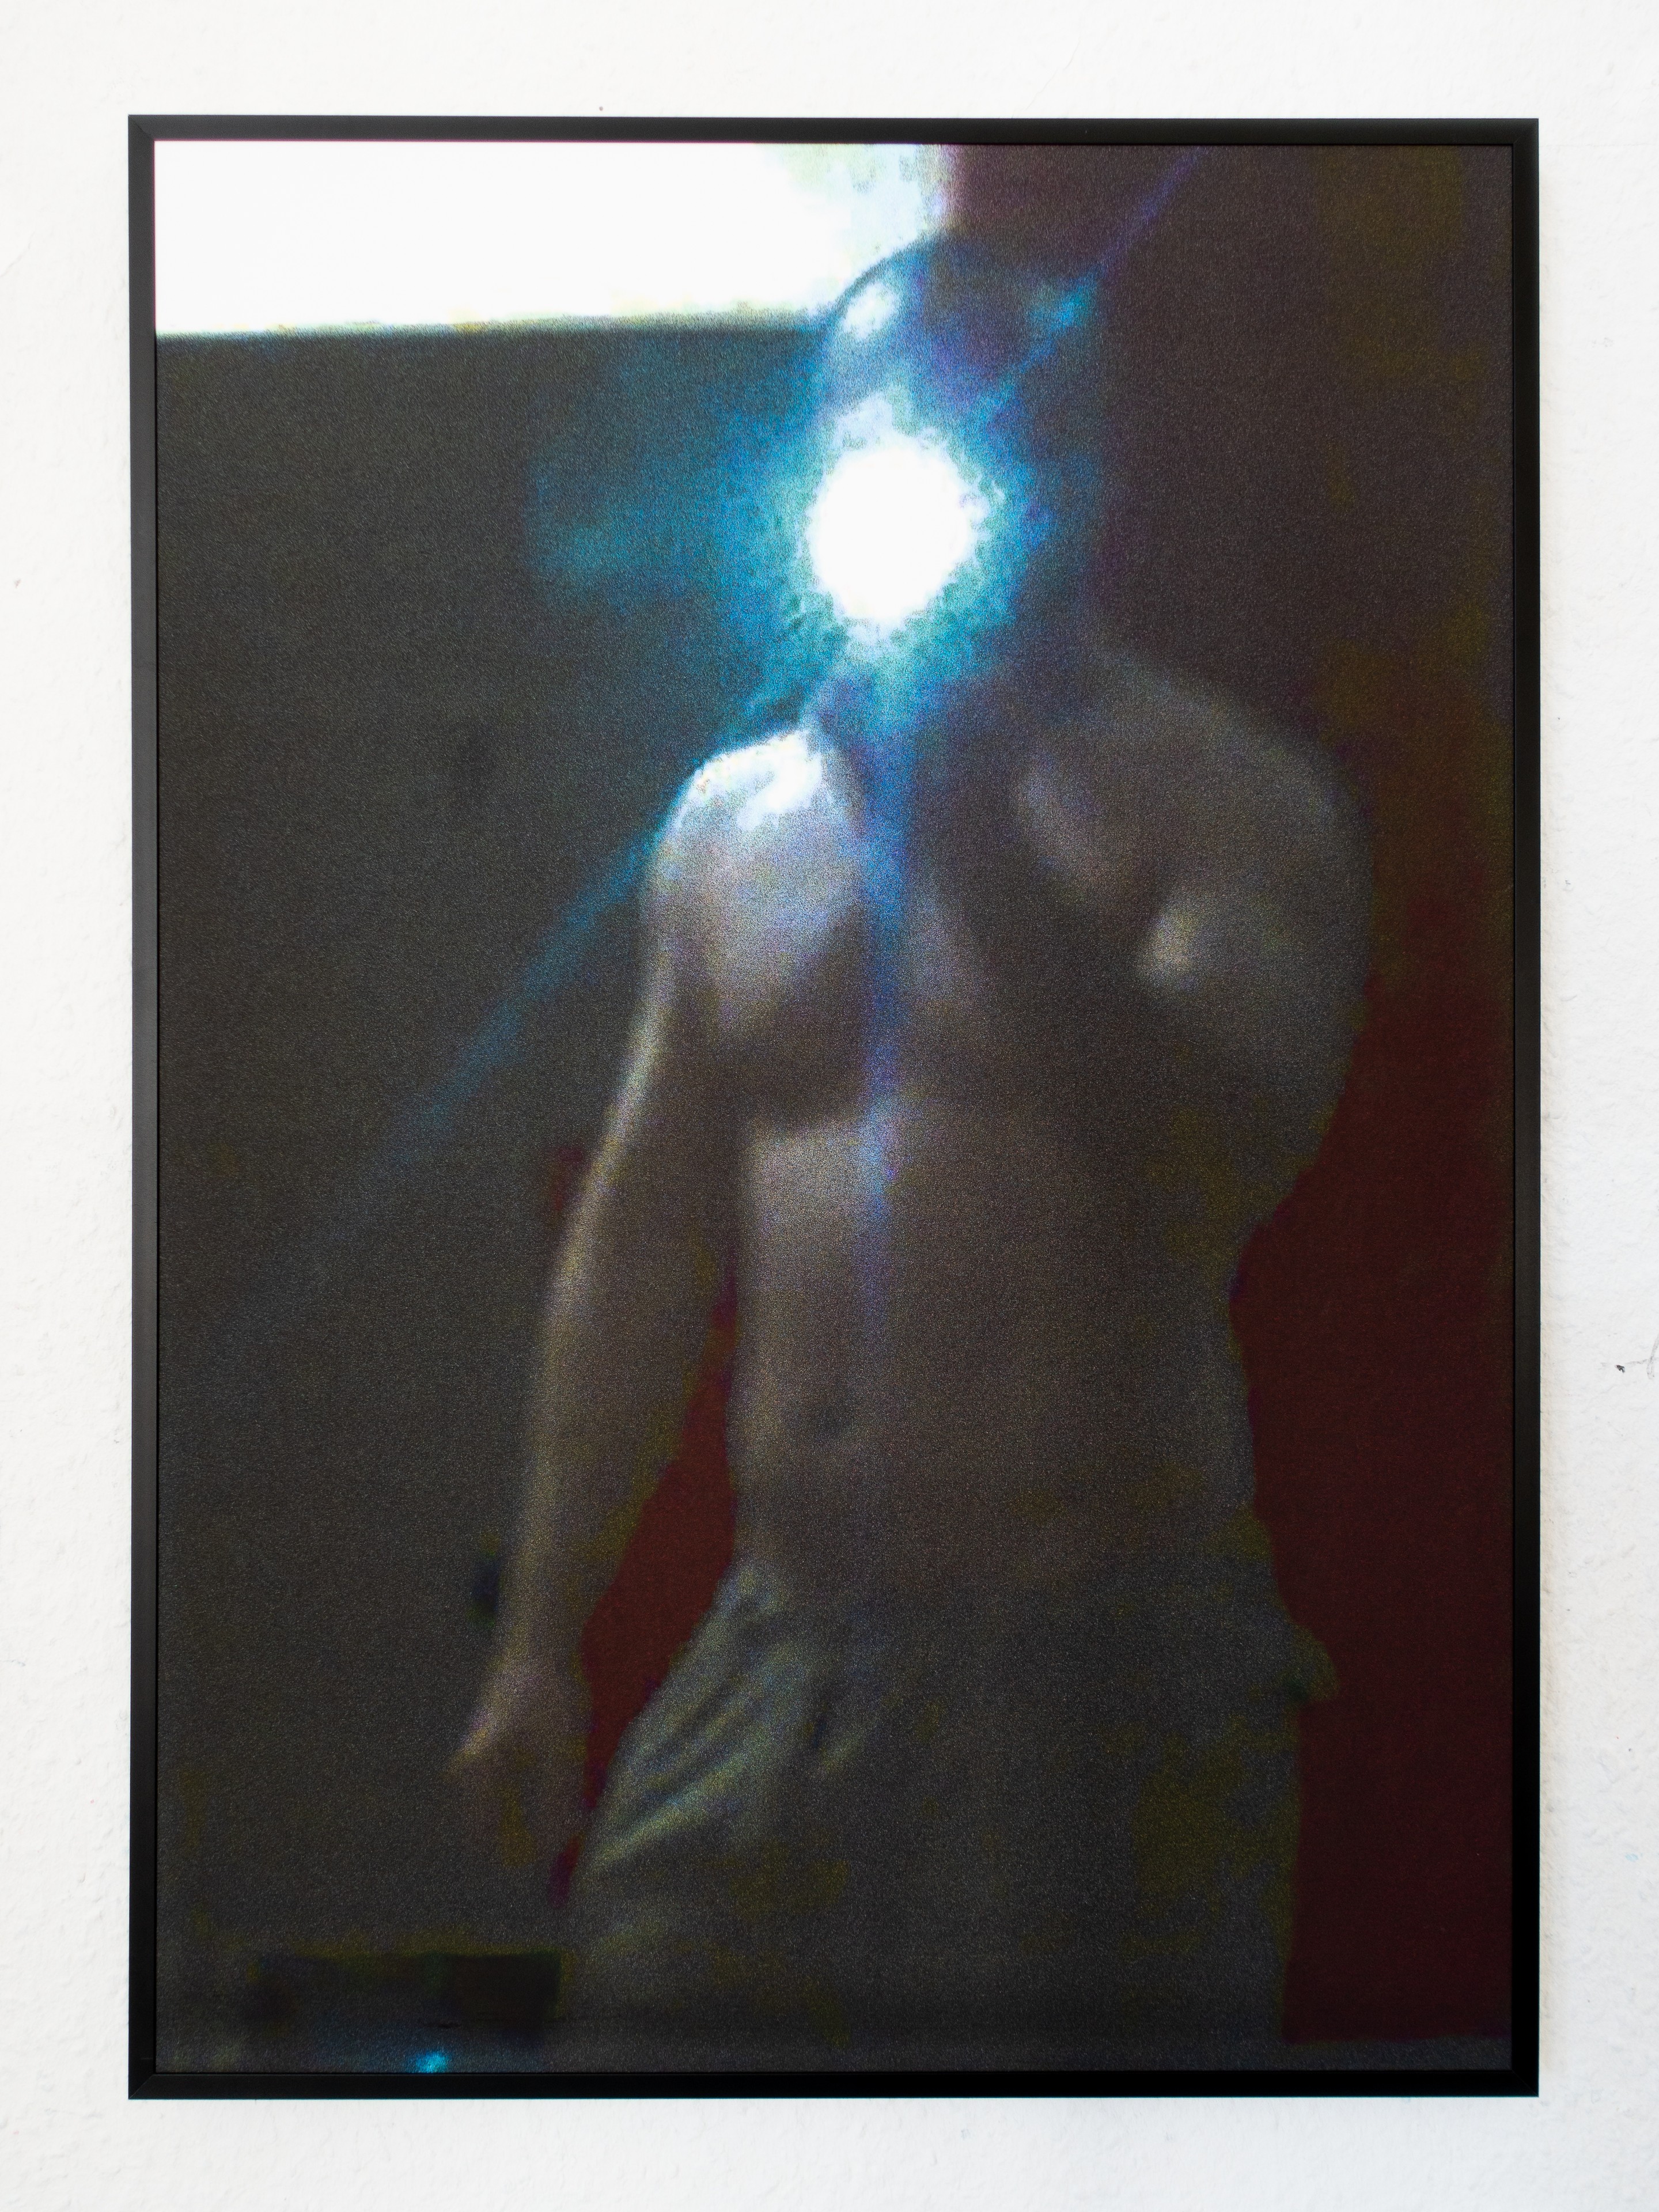 Figures of lust furtively encountered in the night (2001)

Archival inkjet print

23.4h x 16.5w inches (59.5h x 42w cm)